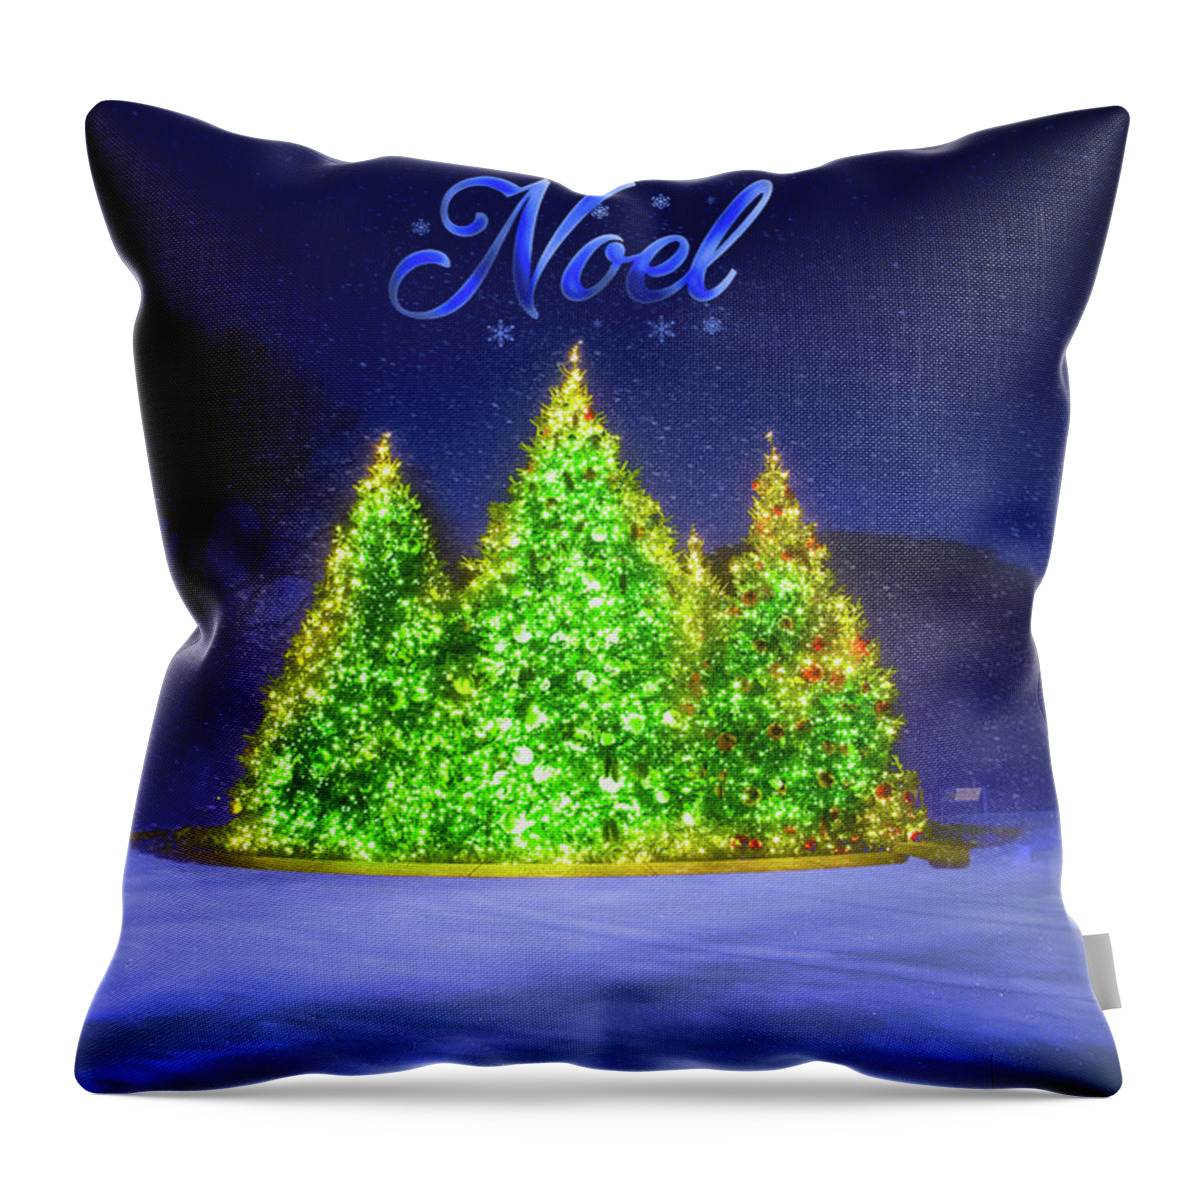 New York Botanical Gardens Throw Pillow featuring the photograph Christmas Tree Greeting Card by Mark Andrew Thomas